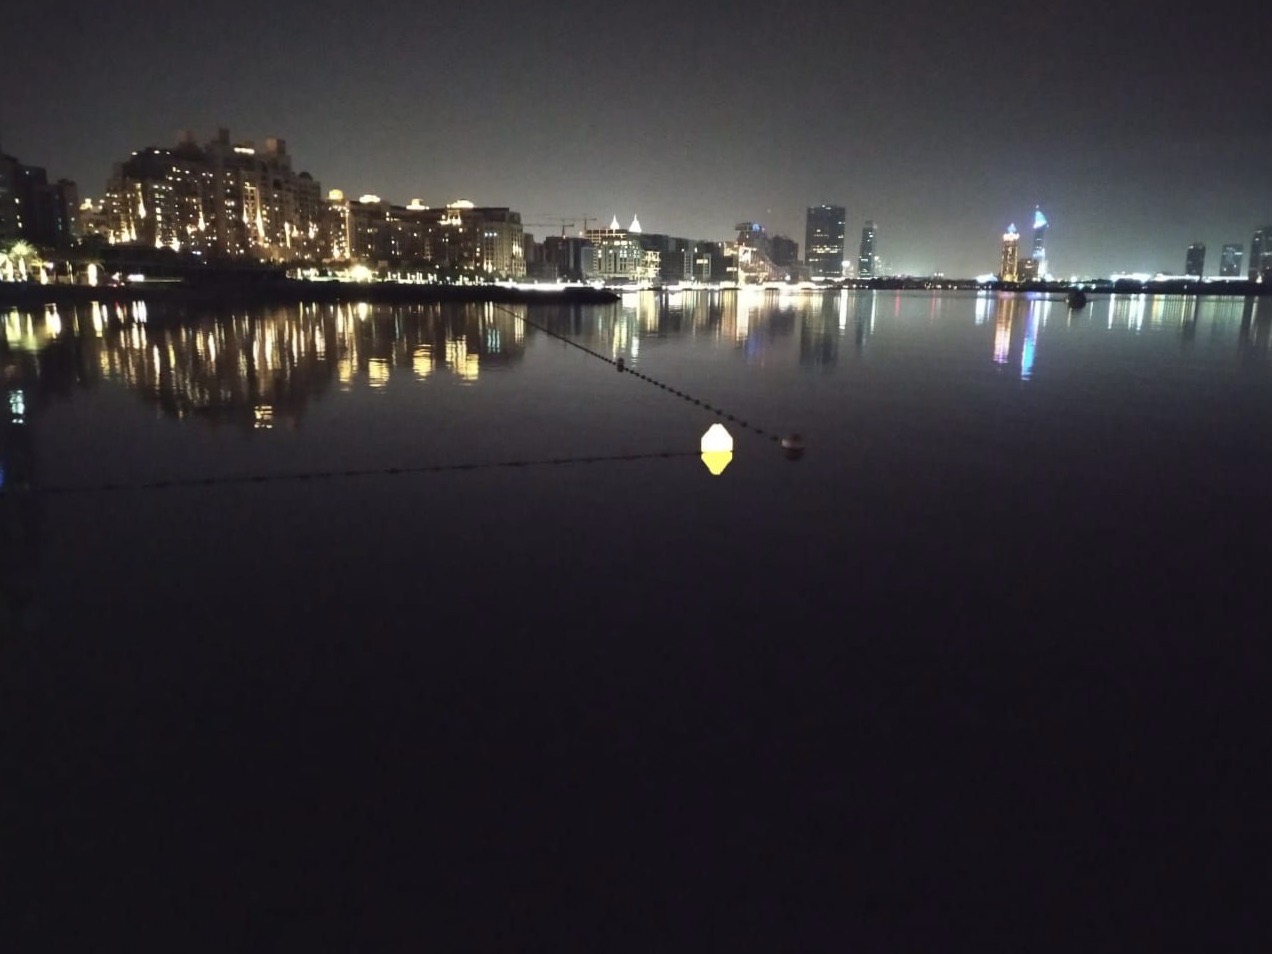 New Ecobarrier Light Buoys (ELB-650) Are Now Demarcating Coastal Areas in Dubai At Night